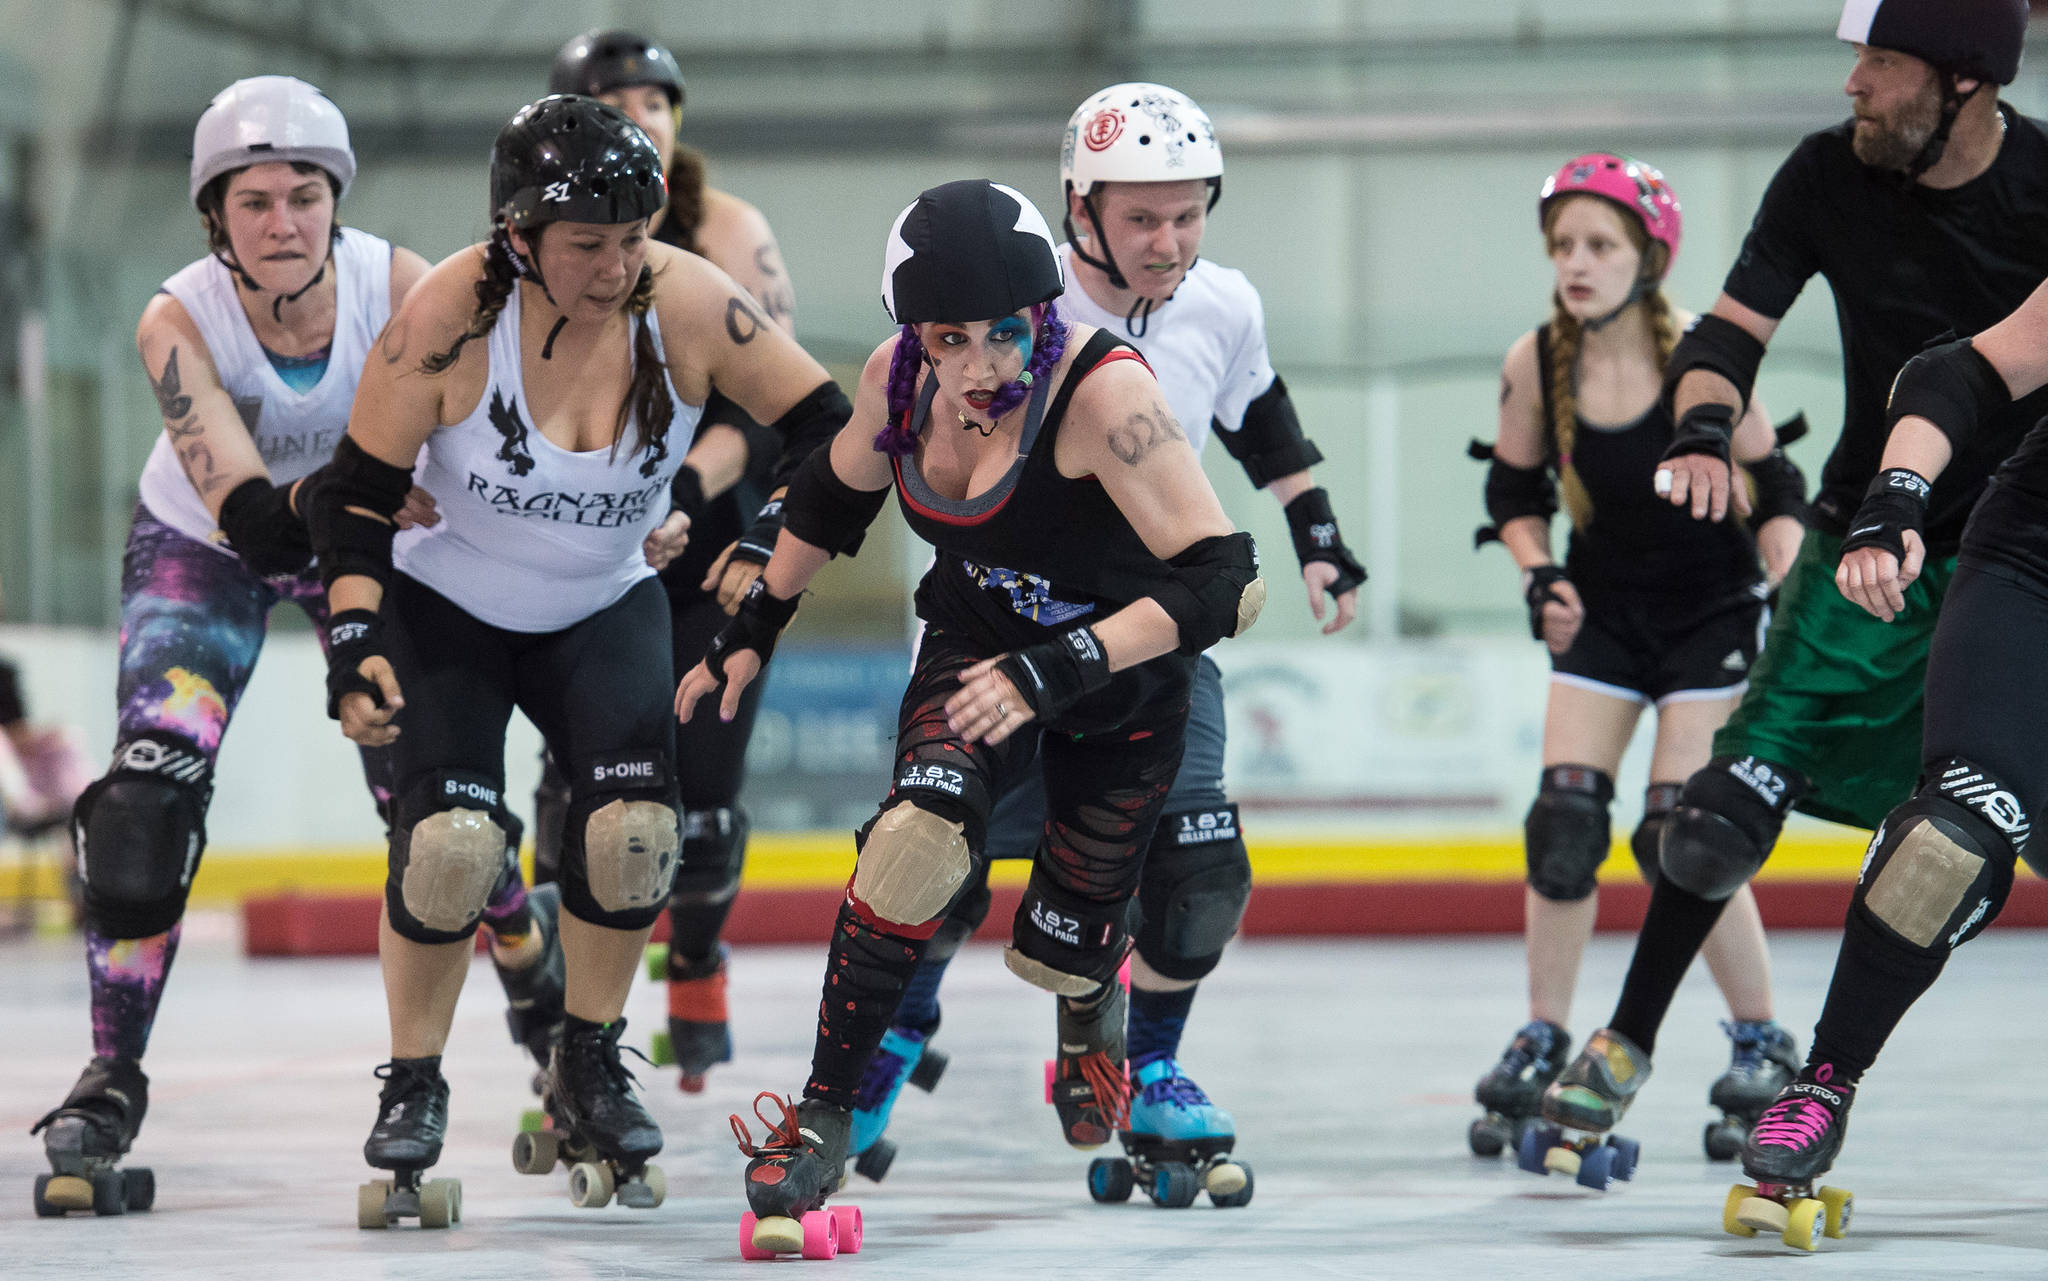 Shari “Juke-N-Cherry” Dundas, visiting from Anchorage, breaks out of the pack during the Juneau Rollergirls first Mashup of the year at the Treadwell Arena on Friday, July 14, 2017. (Michael Penn | Juneau Empire)